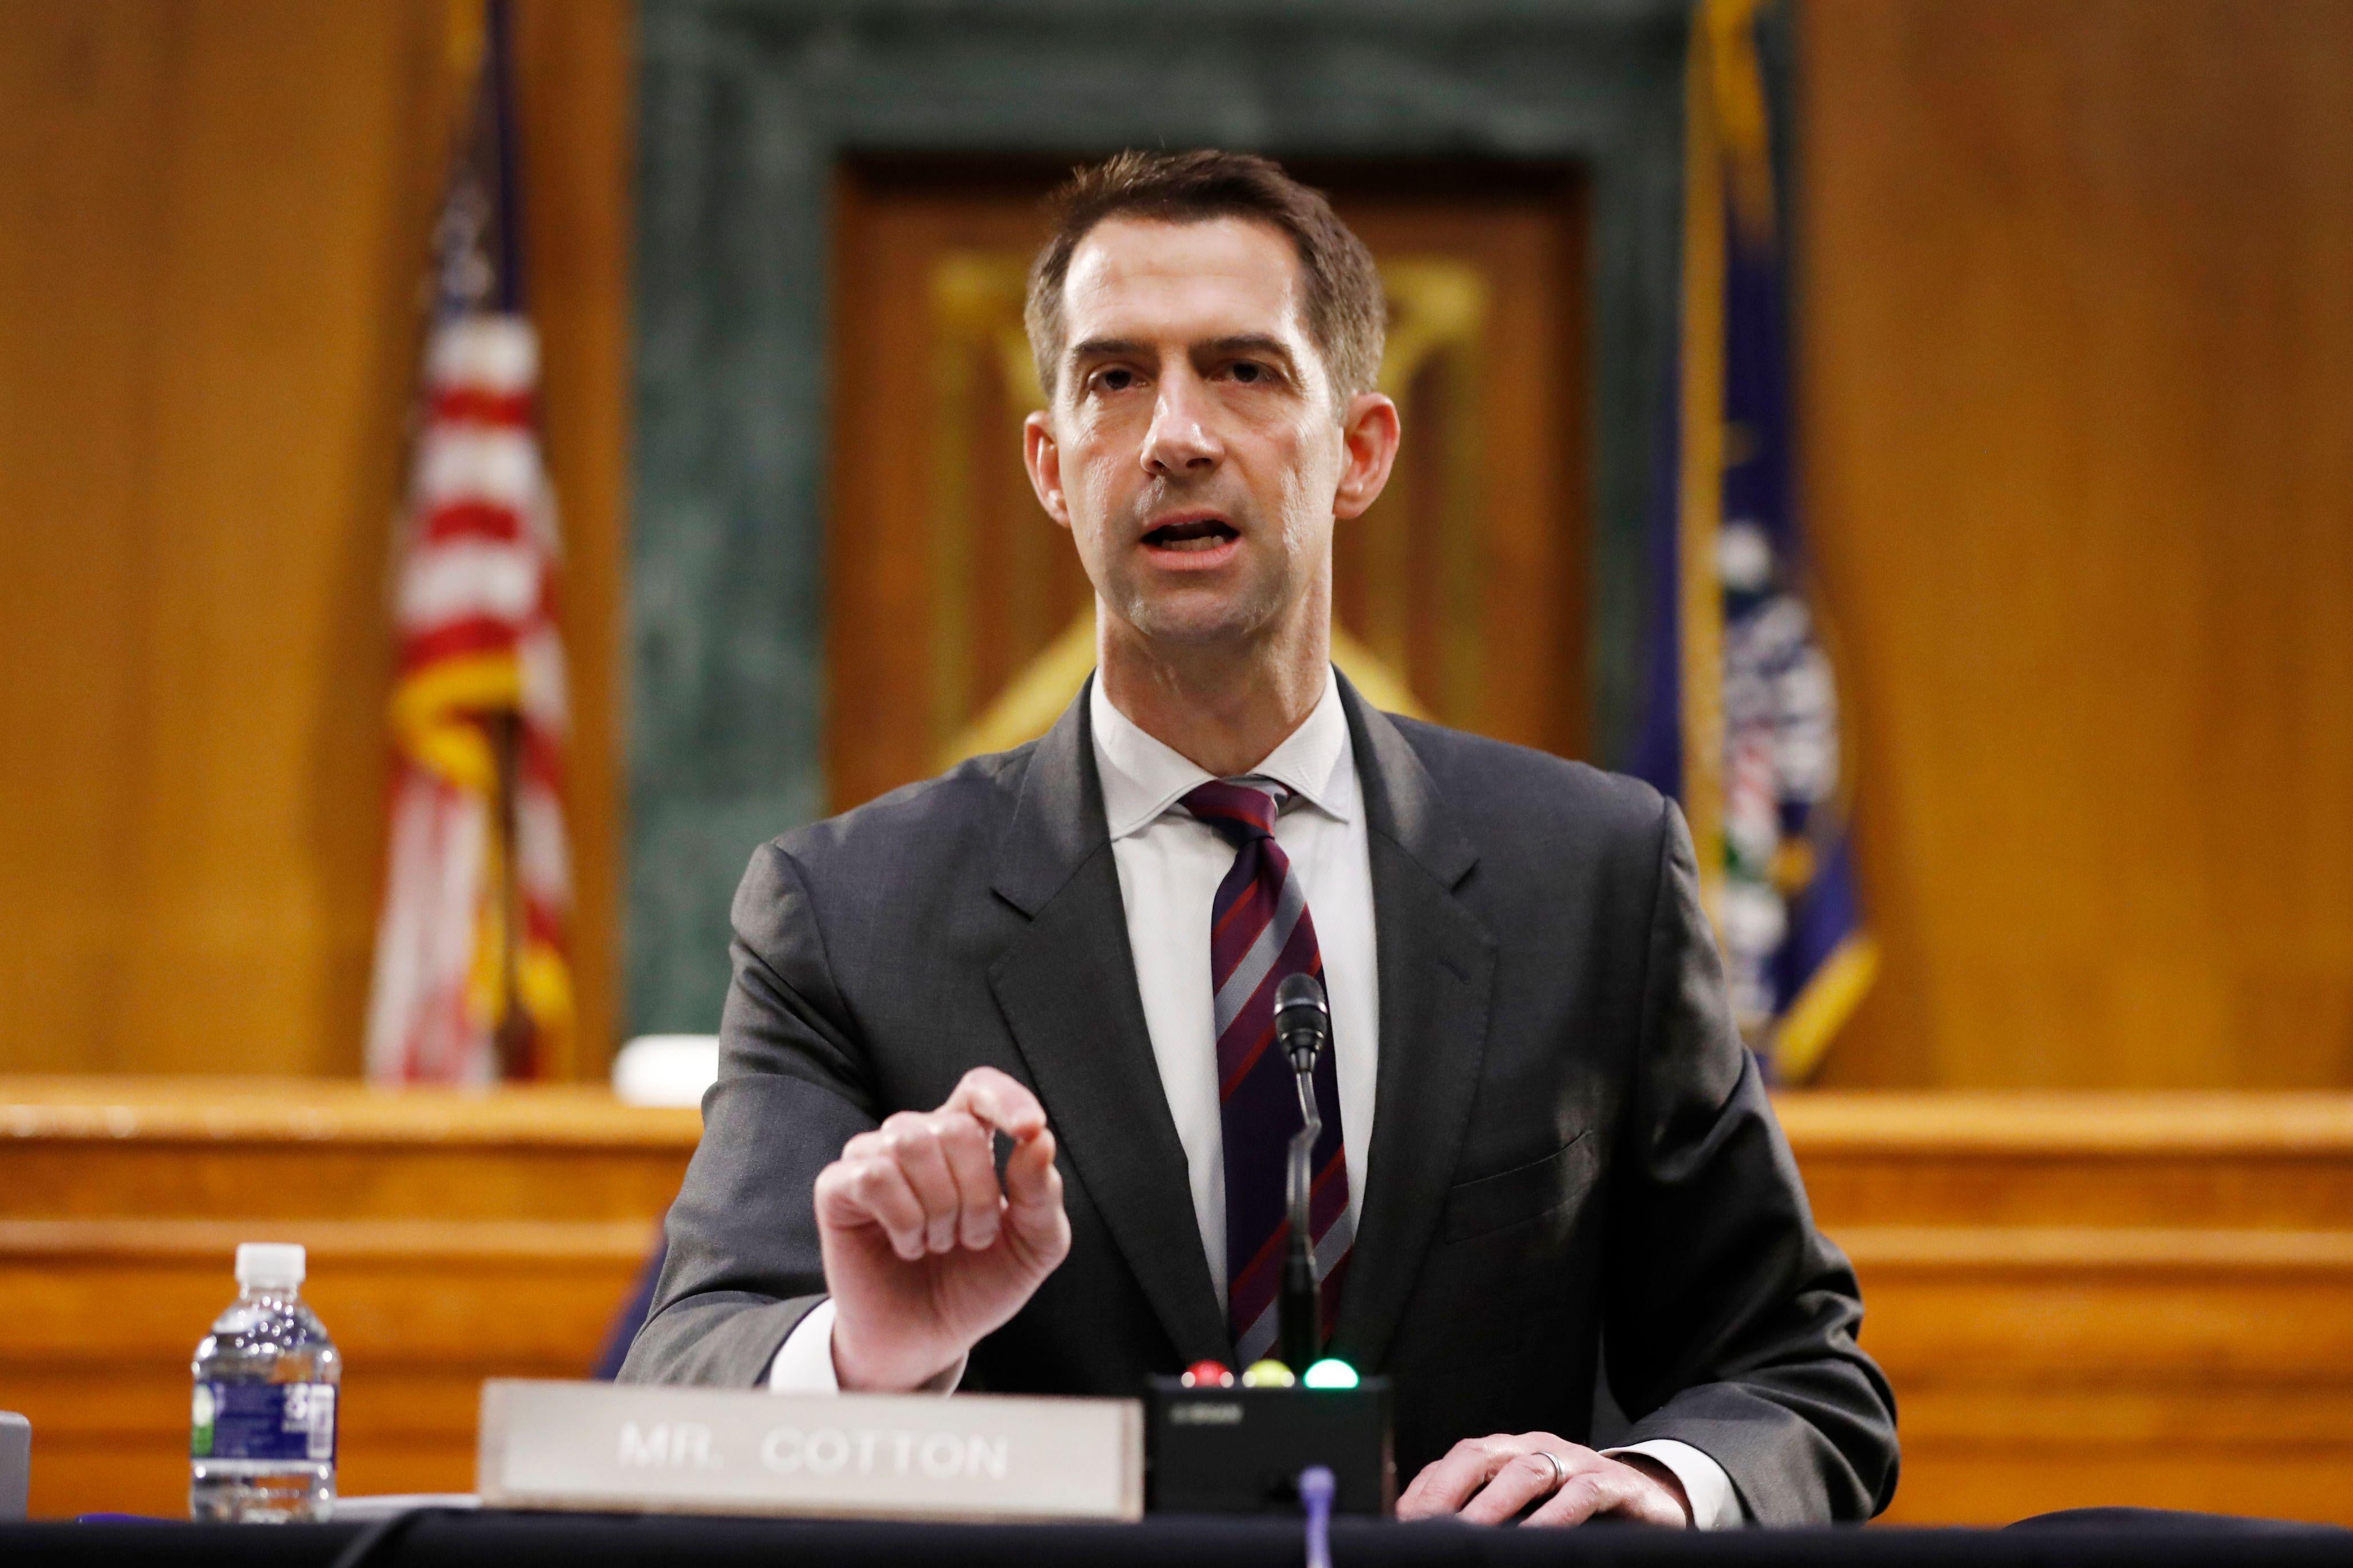 Tom Cotton speaks during a Senate Intelligence Committee hearing